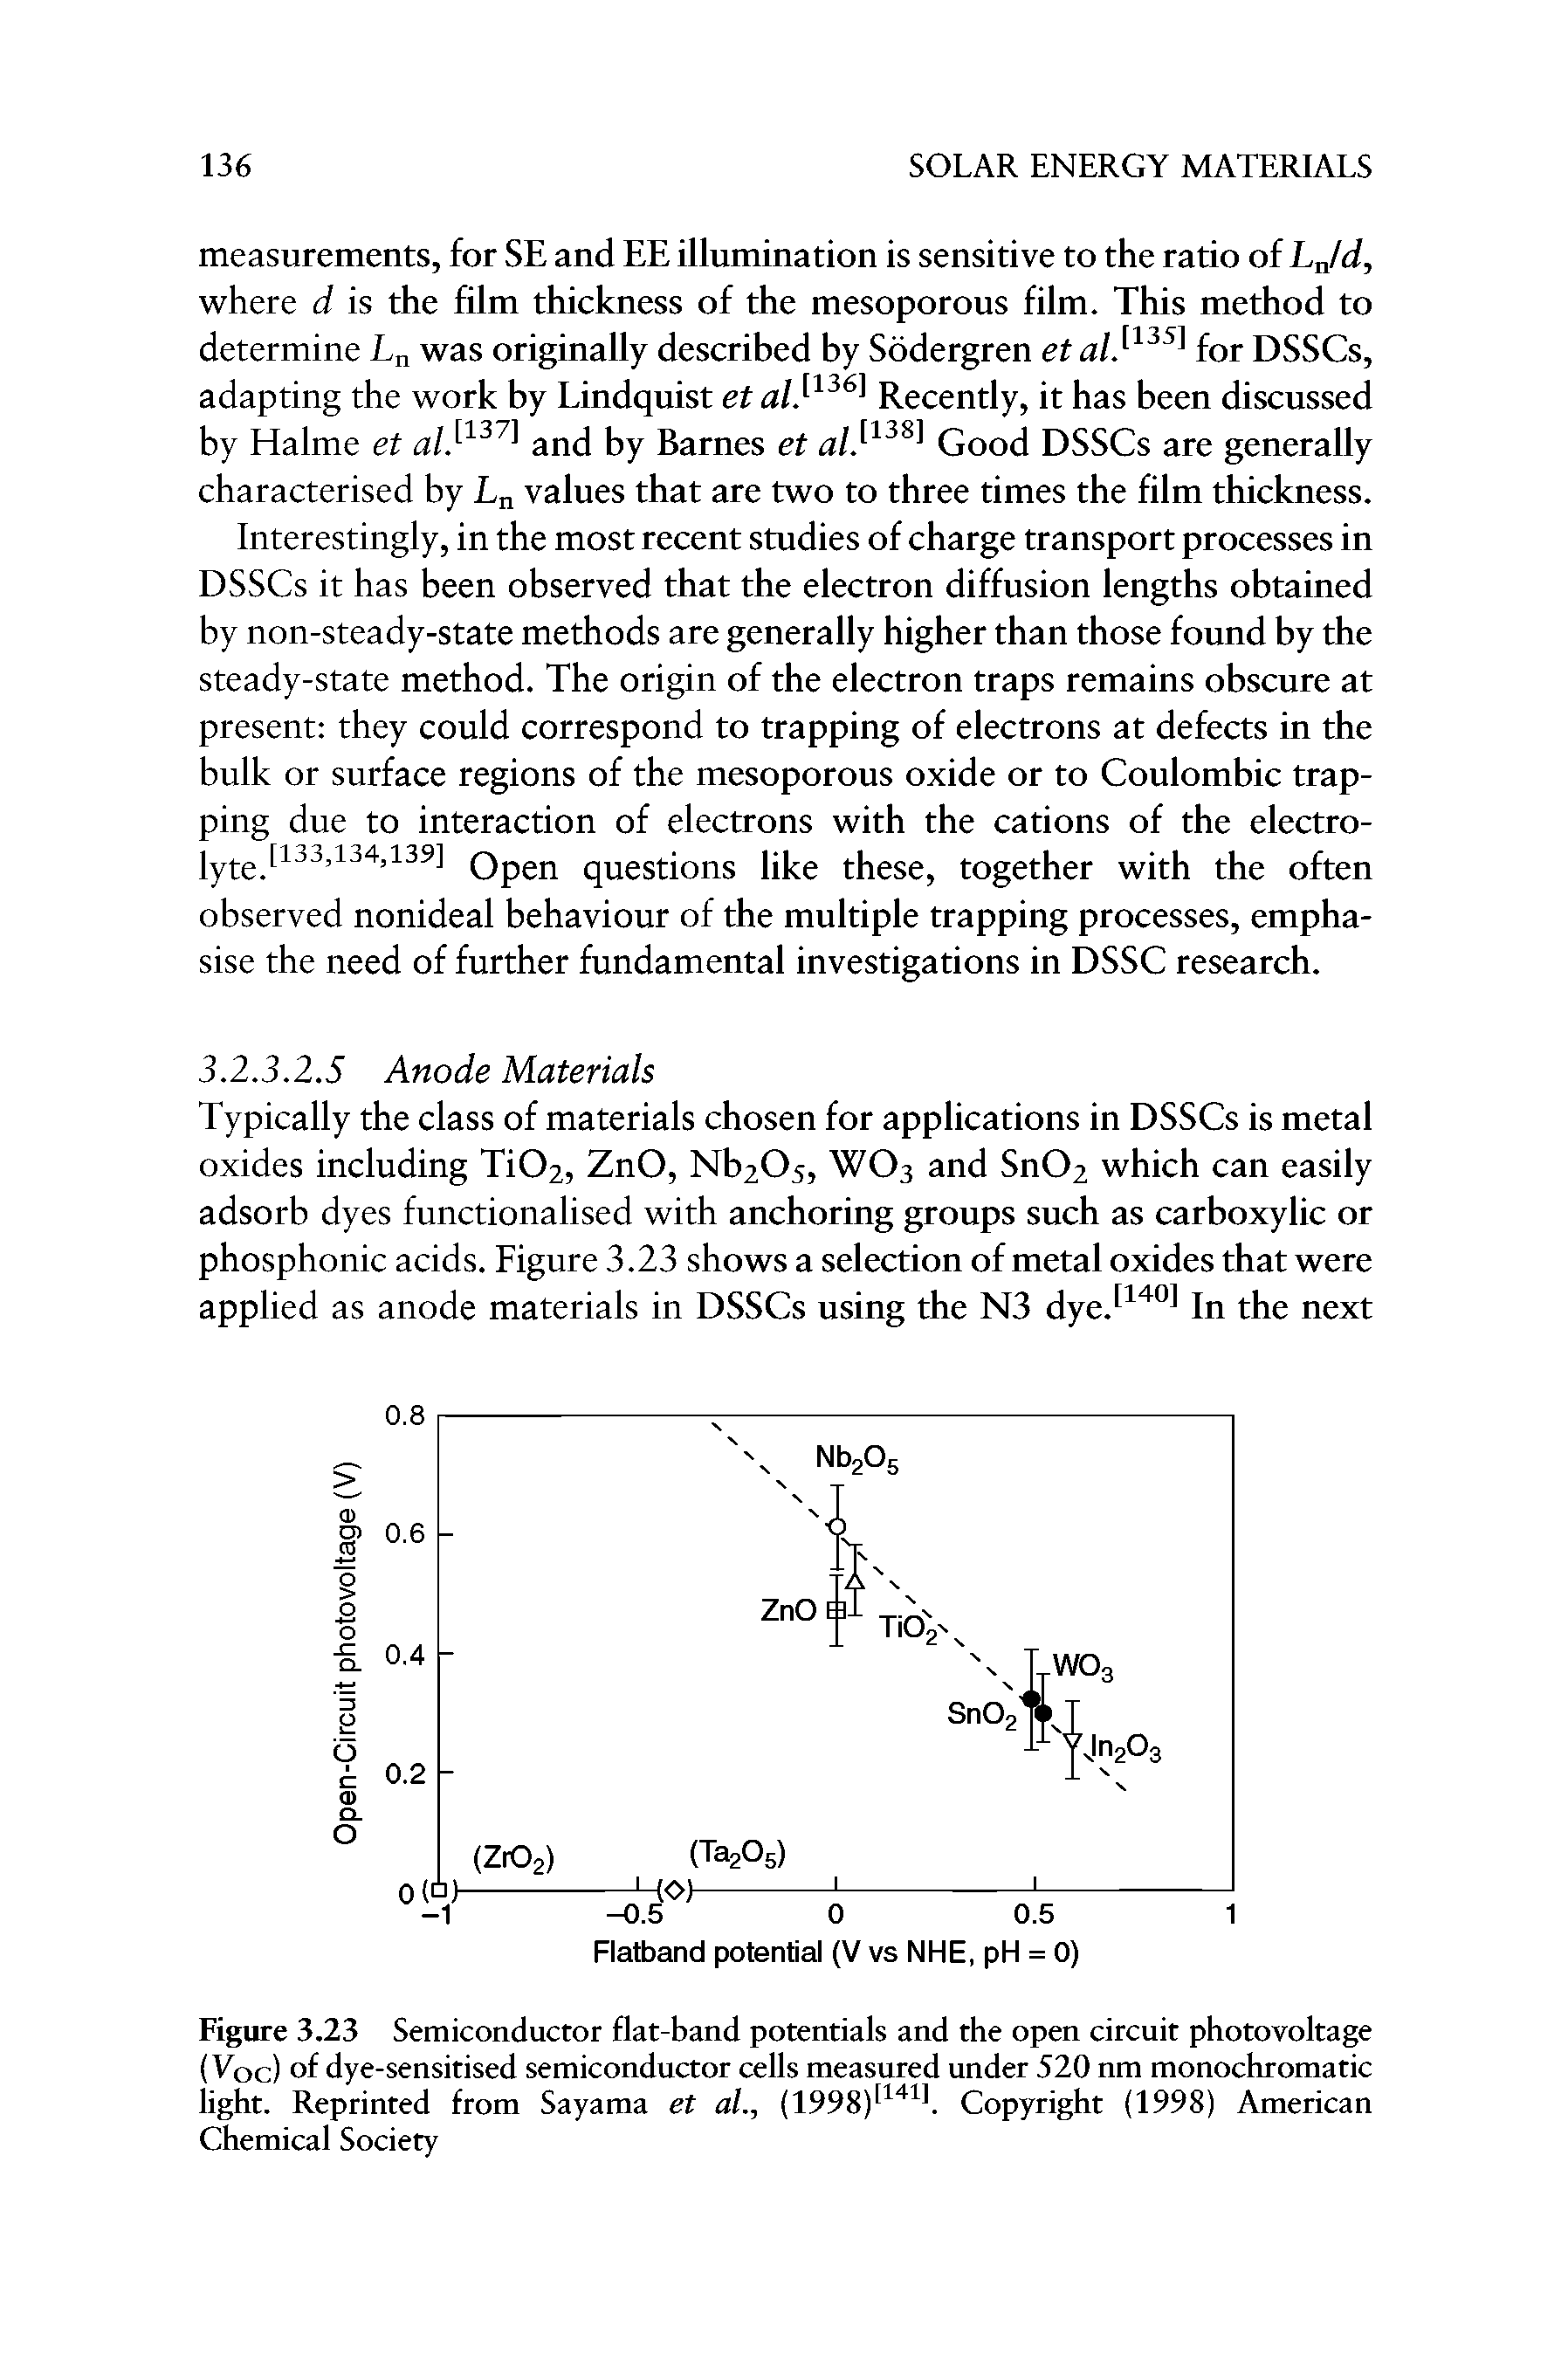 Figure 3.23 Semiconductor flat-band potentials and the open circuit photovoltage (Toe) of dye-sensitised semiconductor cells measured under 520 nm monochromatic light. Reprinted from Sayama et al., (1998) . Copyright (1998) American Chemical Society...